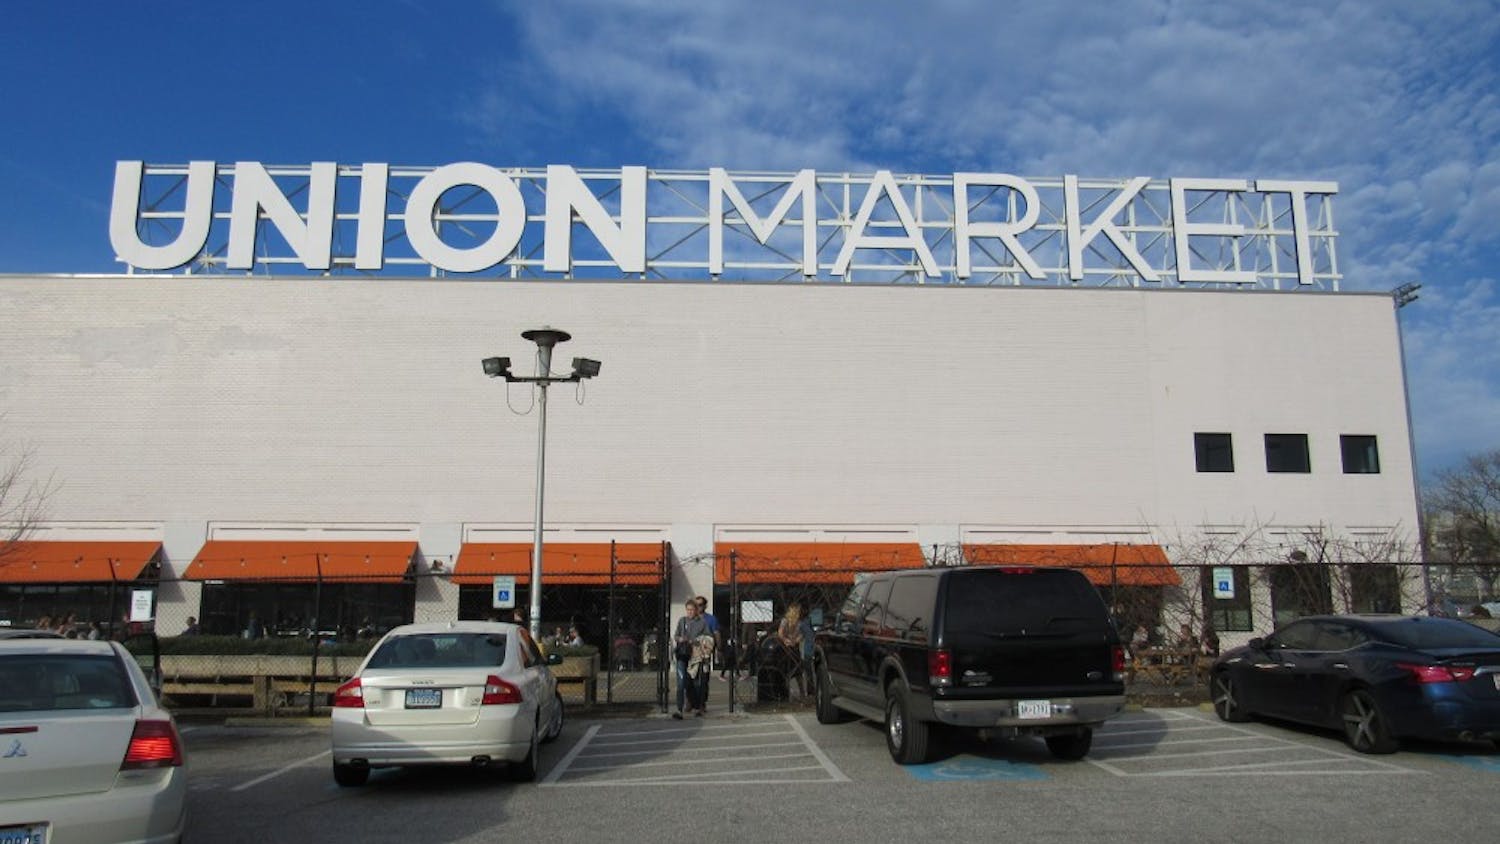 The biannual Emoriyum food festival will take place at Union Market this weekend. Photo Courtesy of Wikimedia Commons.